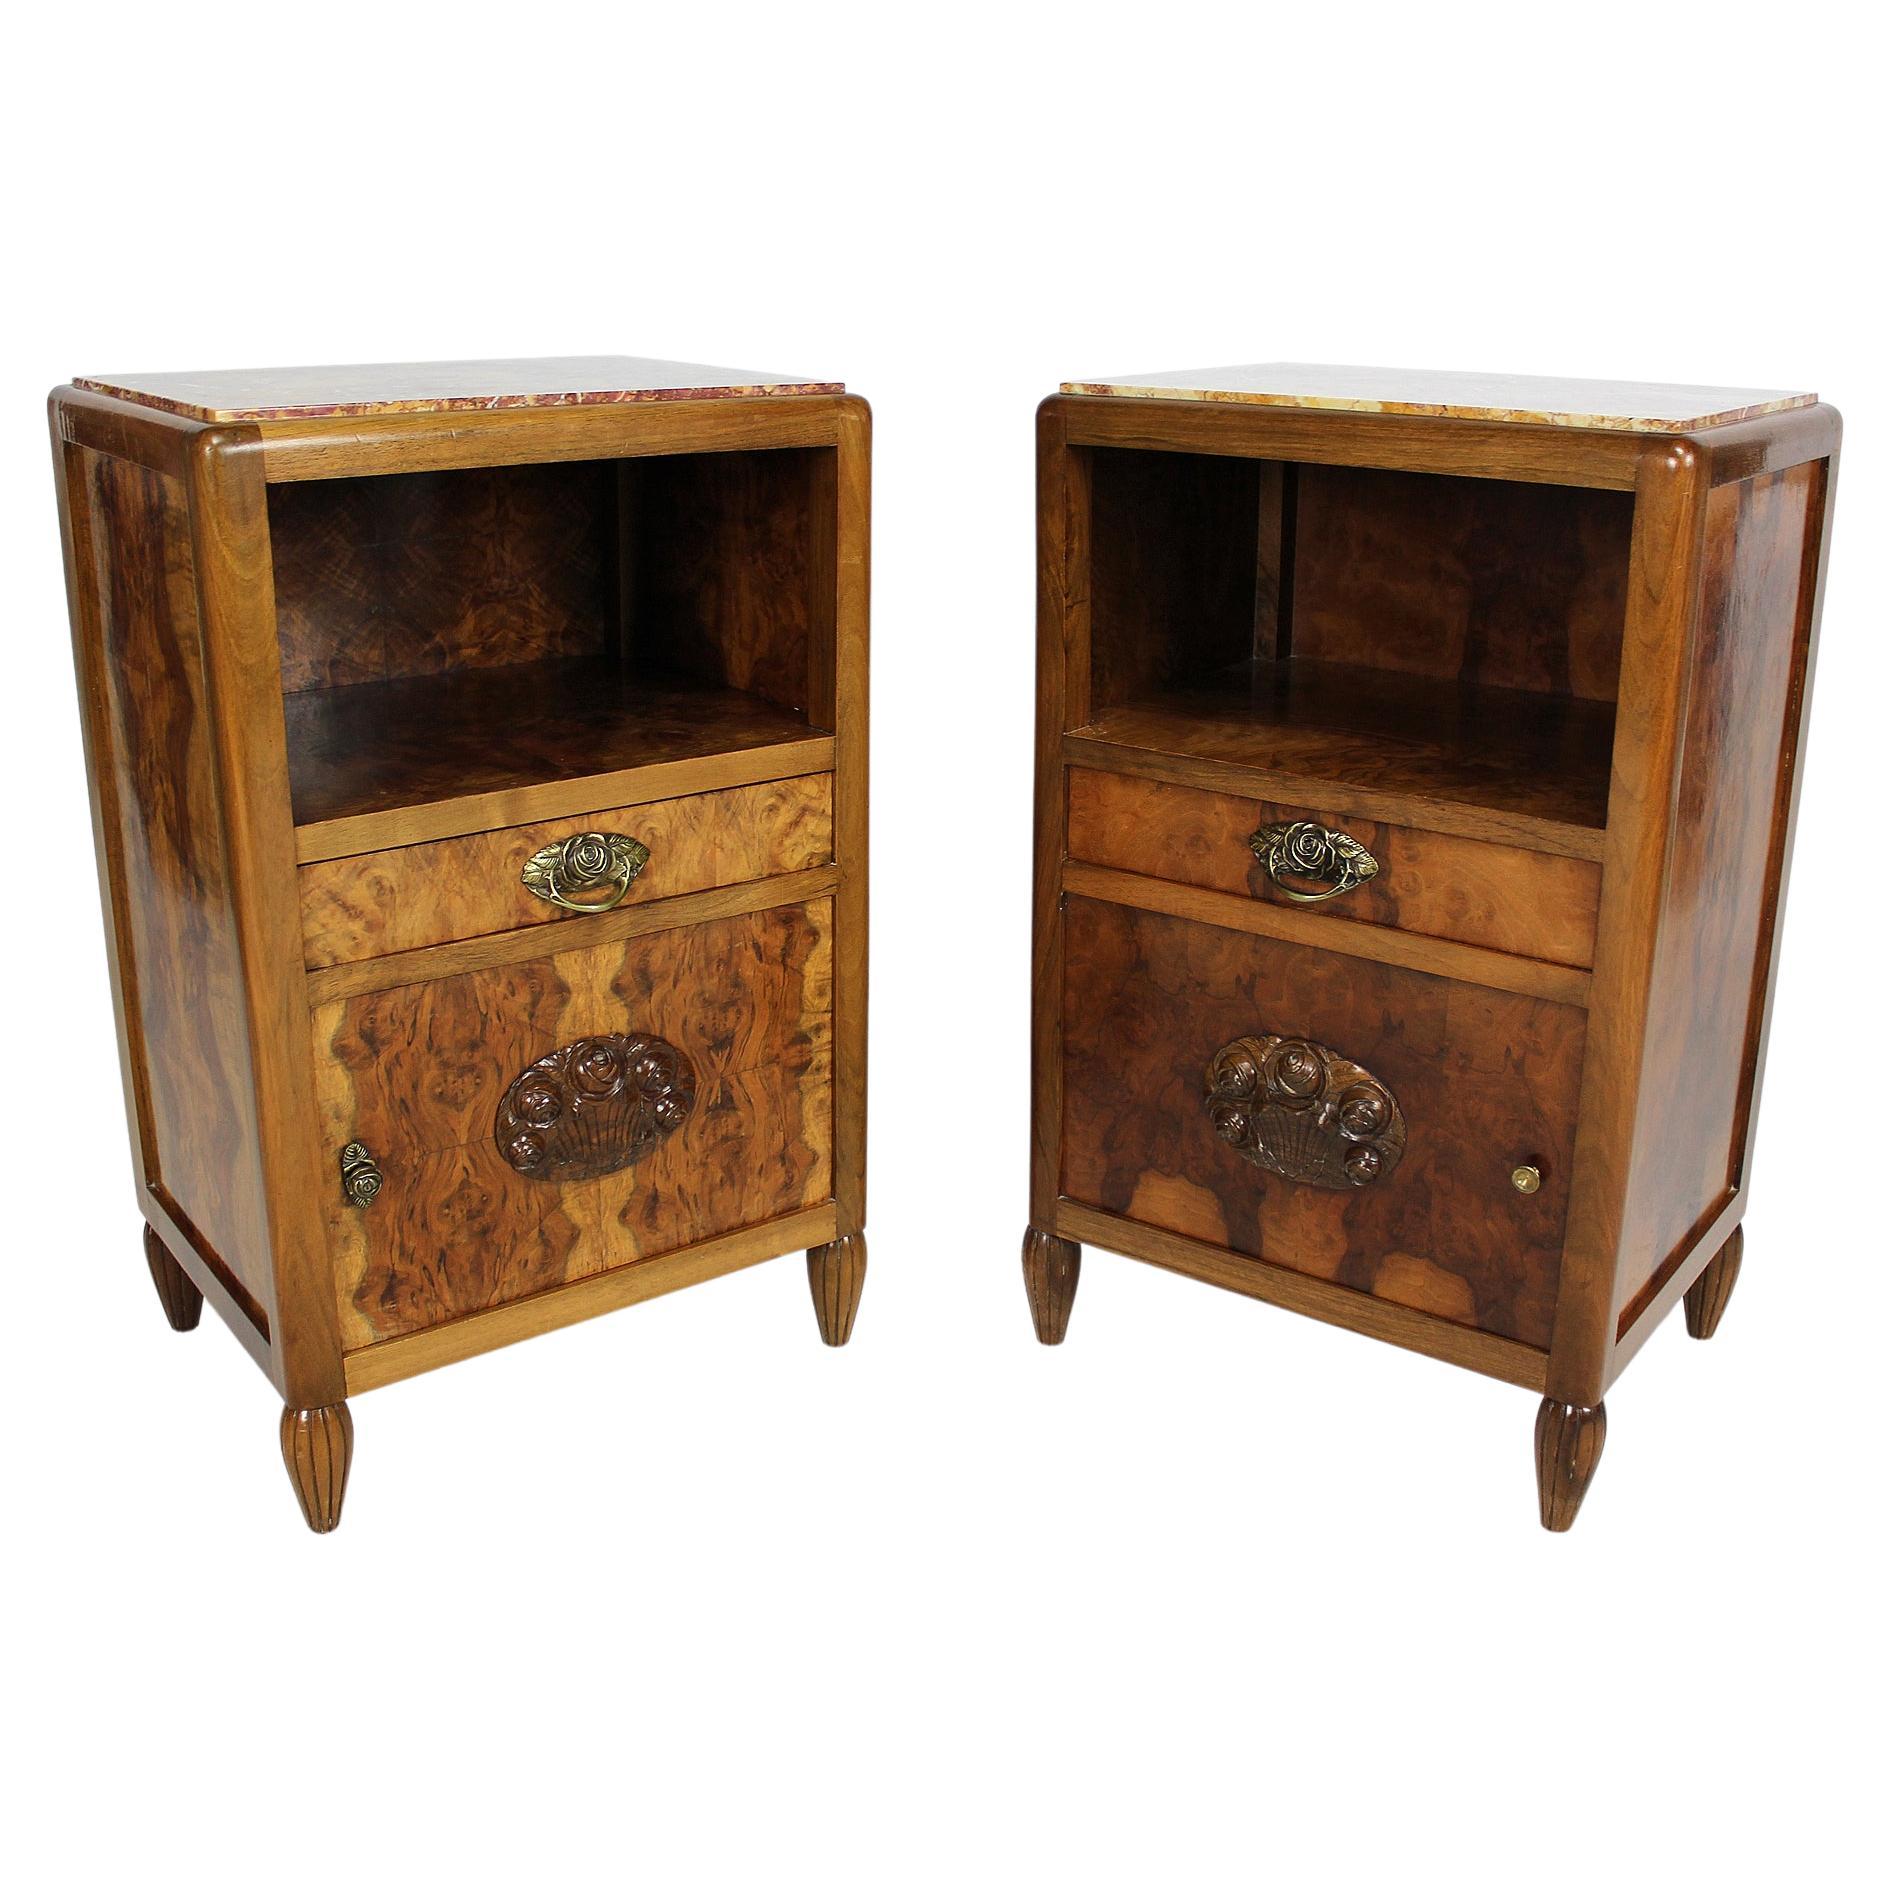 Pair of Art Deco Bedside Tables by Ateliers Gauthier-Poinsignon, circa 1920-1930 For Sale